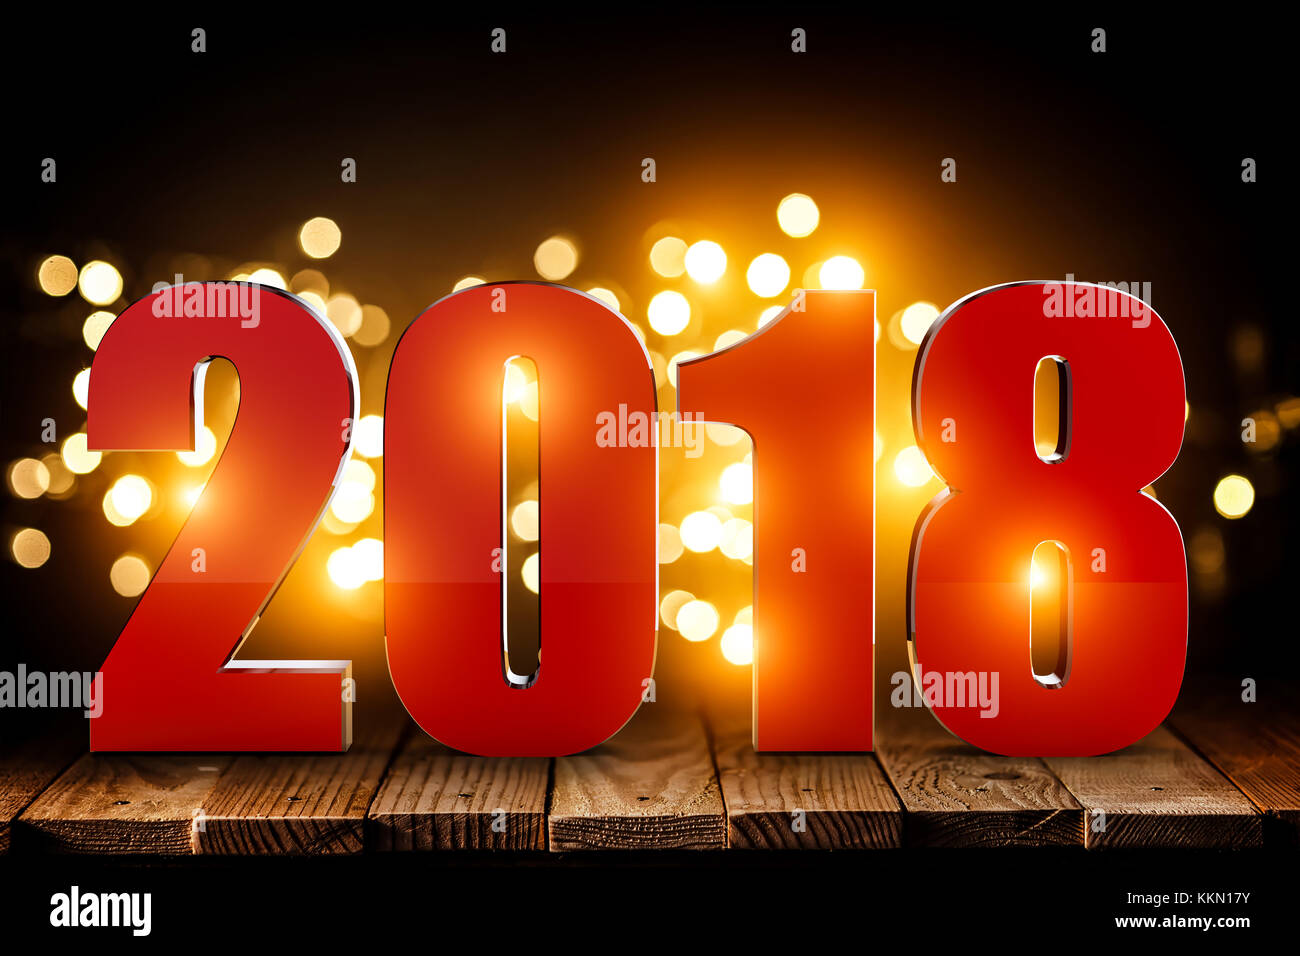 2018 text and blurred light background 3d rendering image Stock Photo